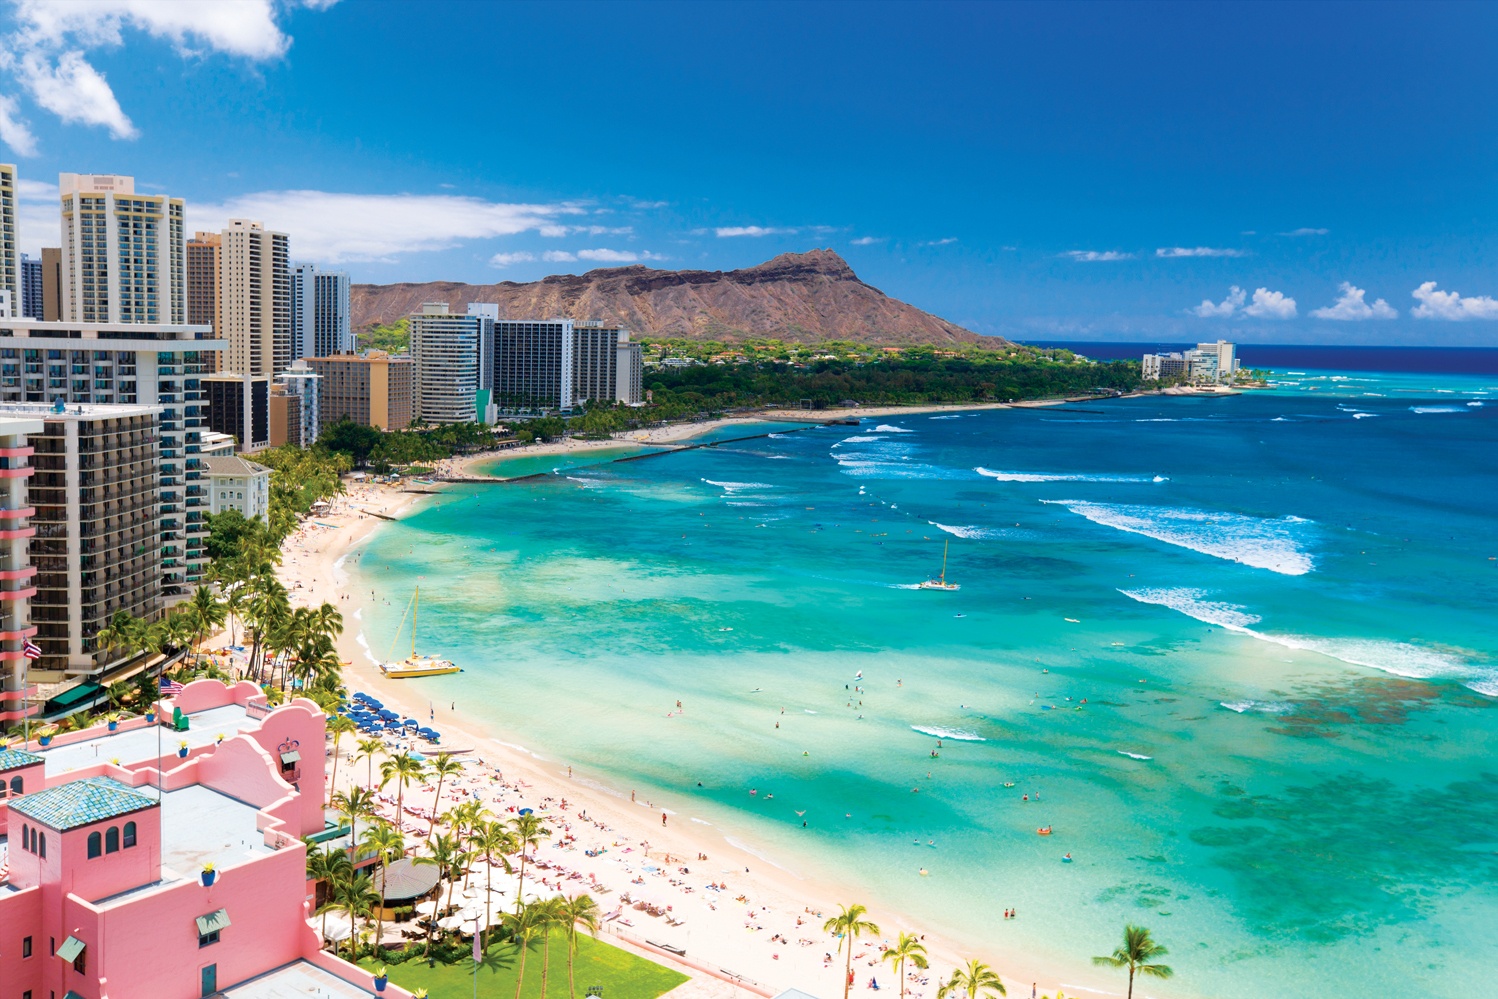 Find out what to do in Honolulu, Hawaii.